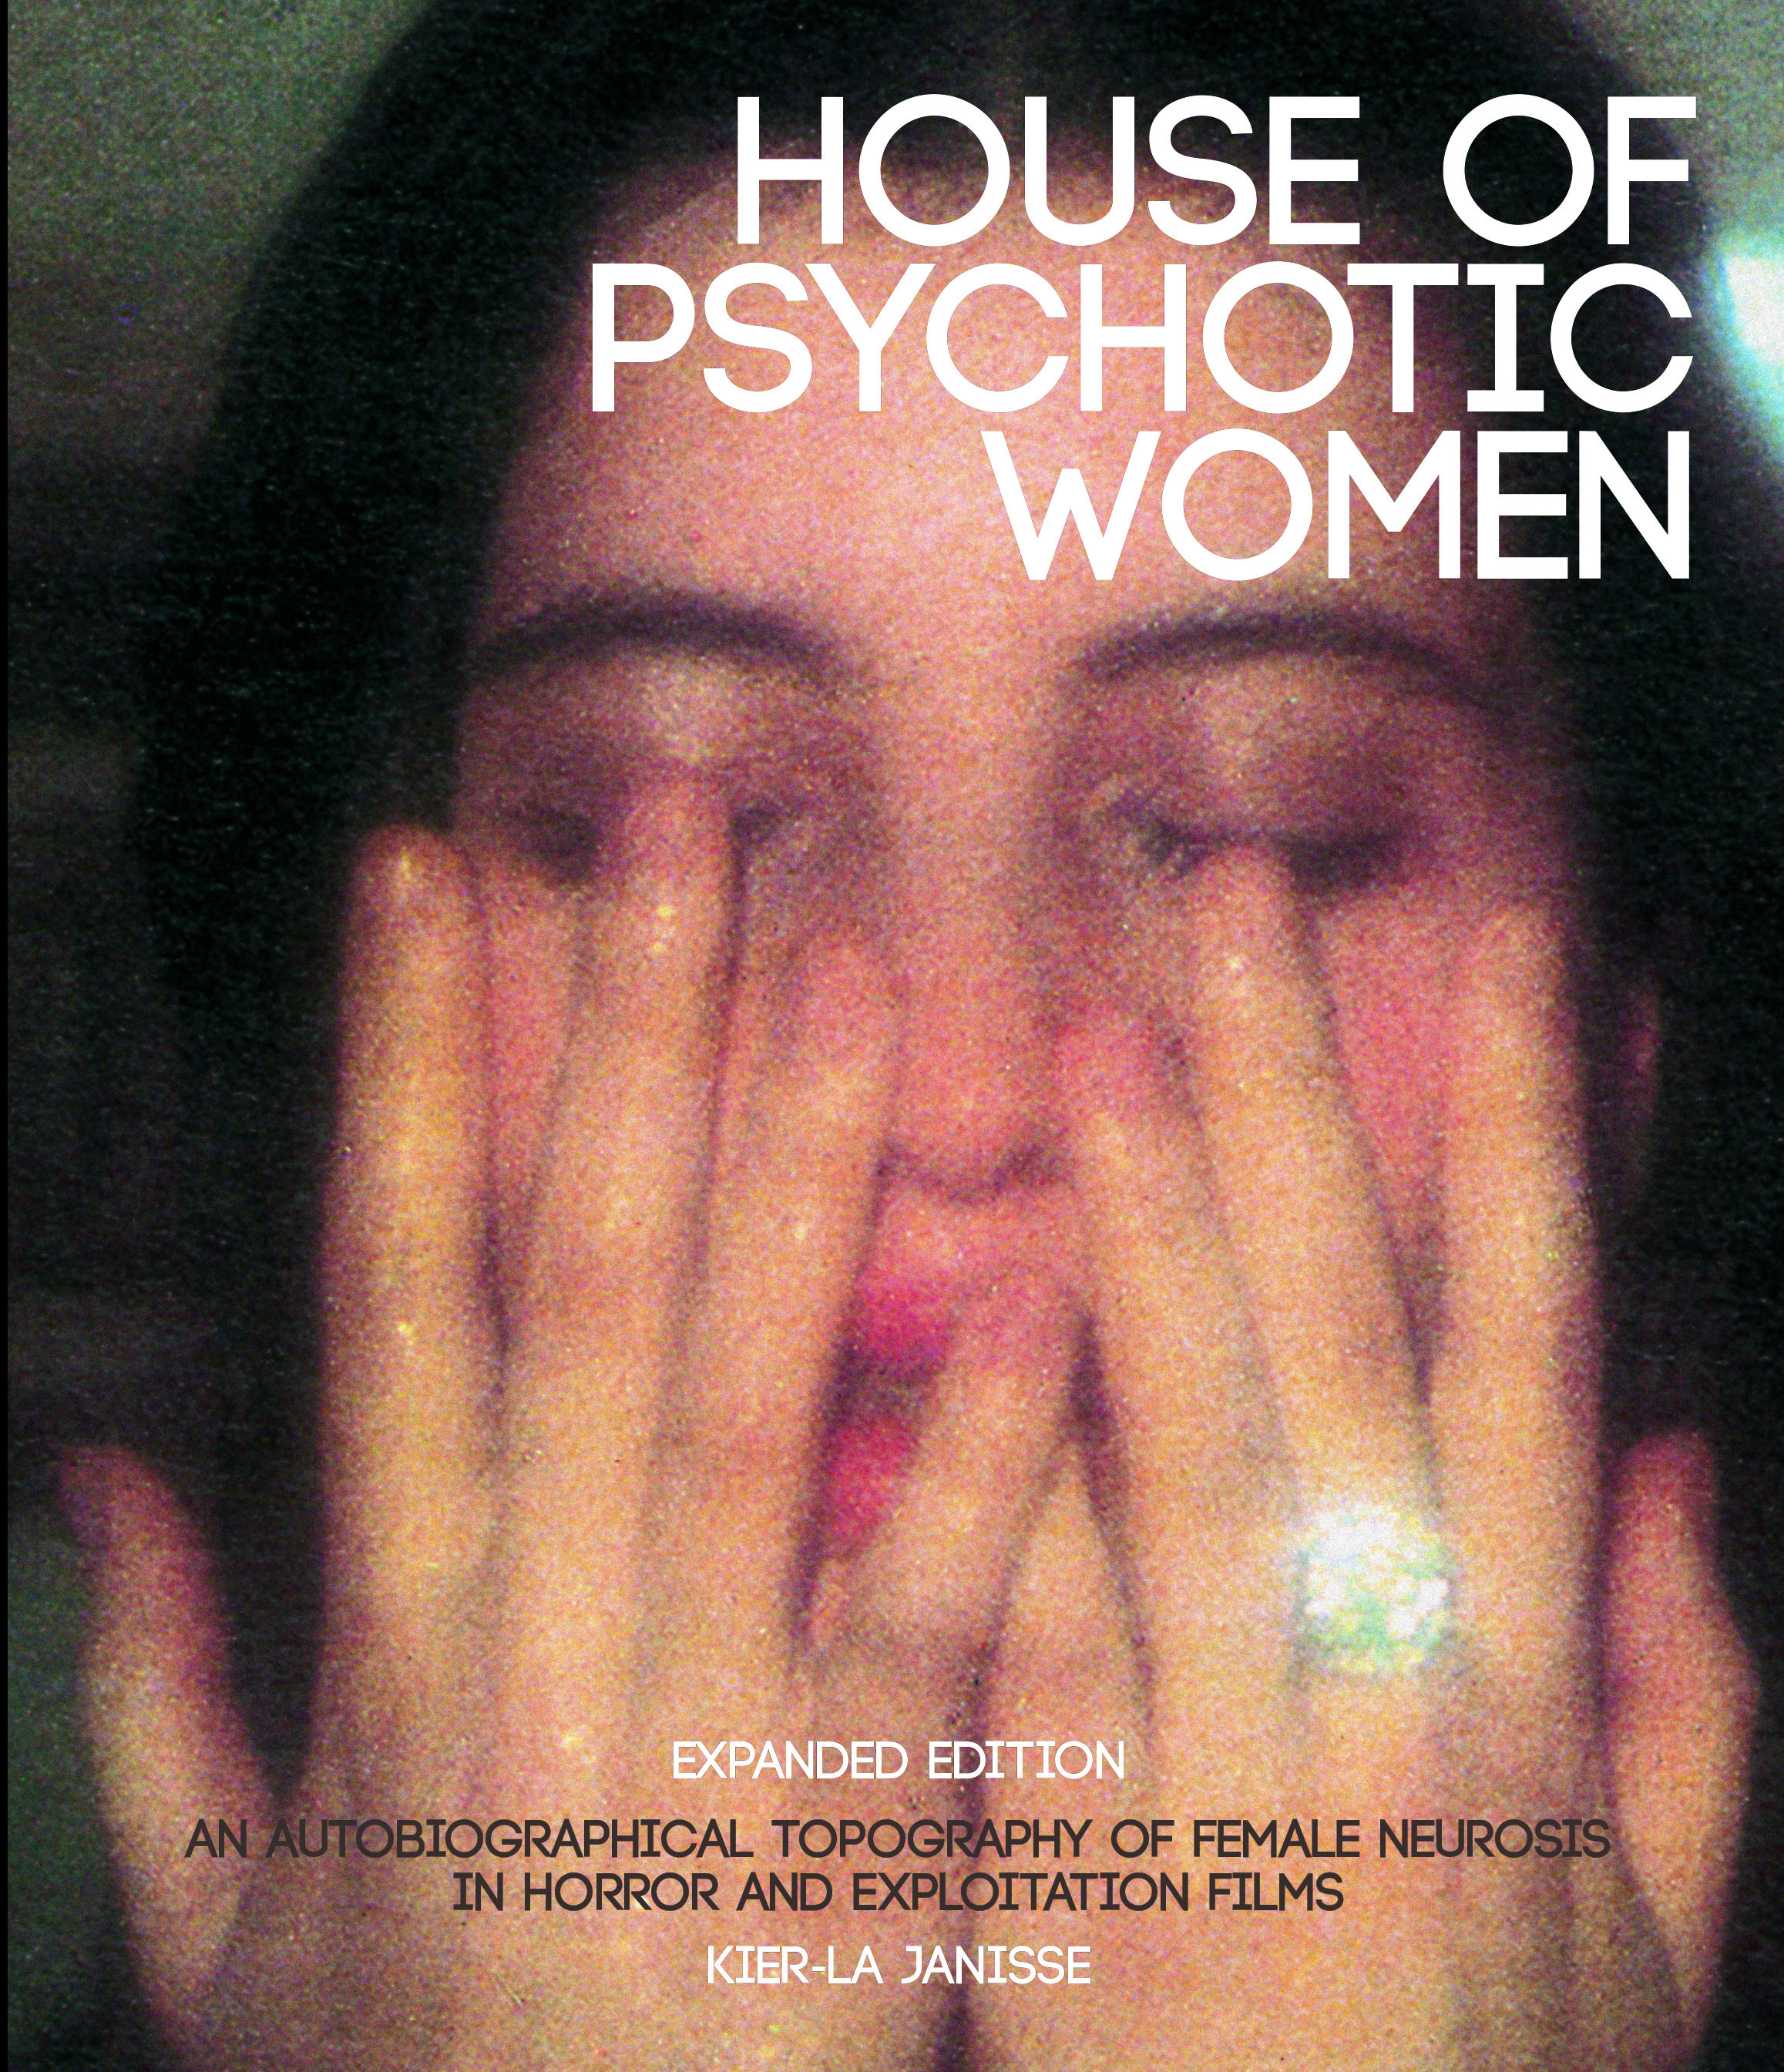 1974 Movie Poster House Of Psychotic Women 